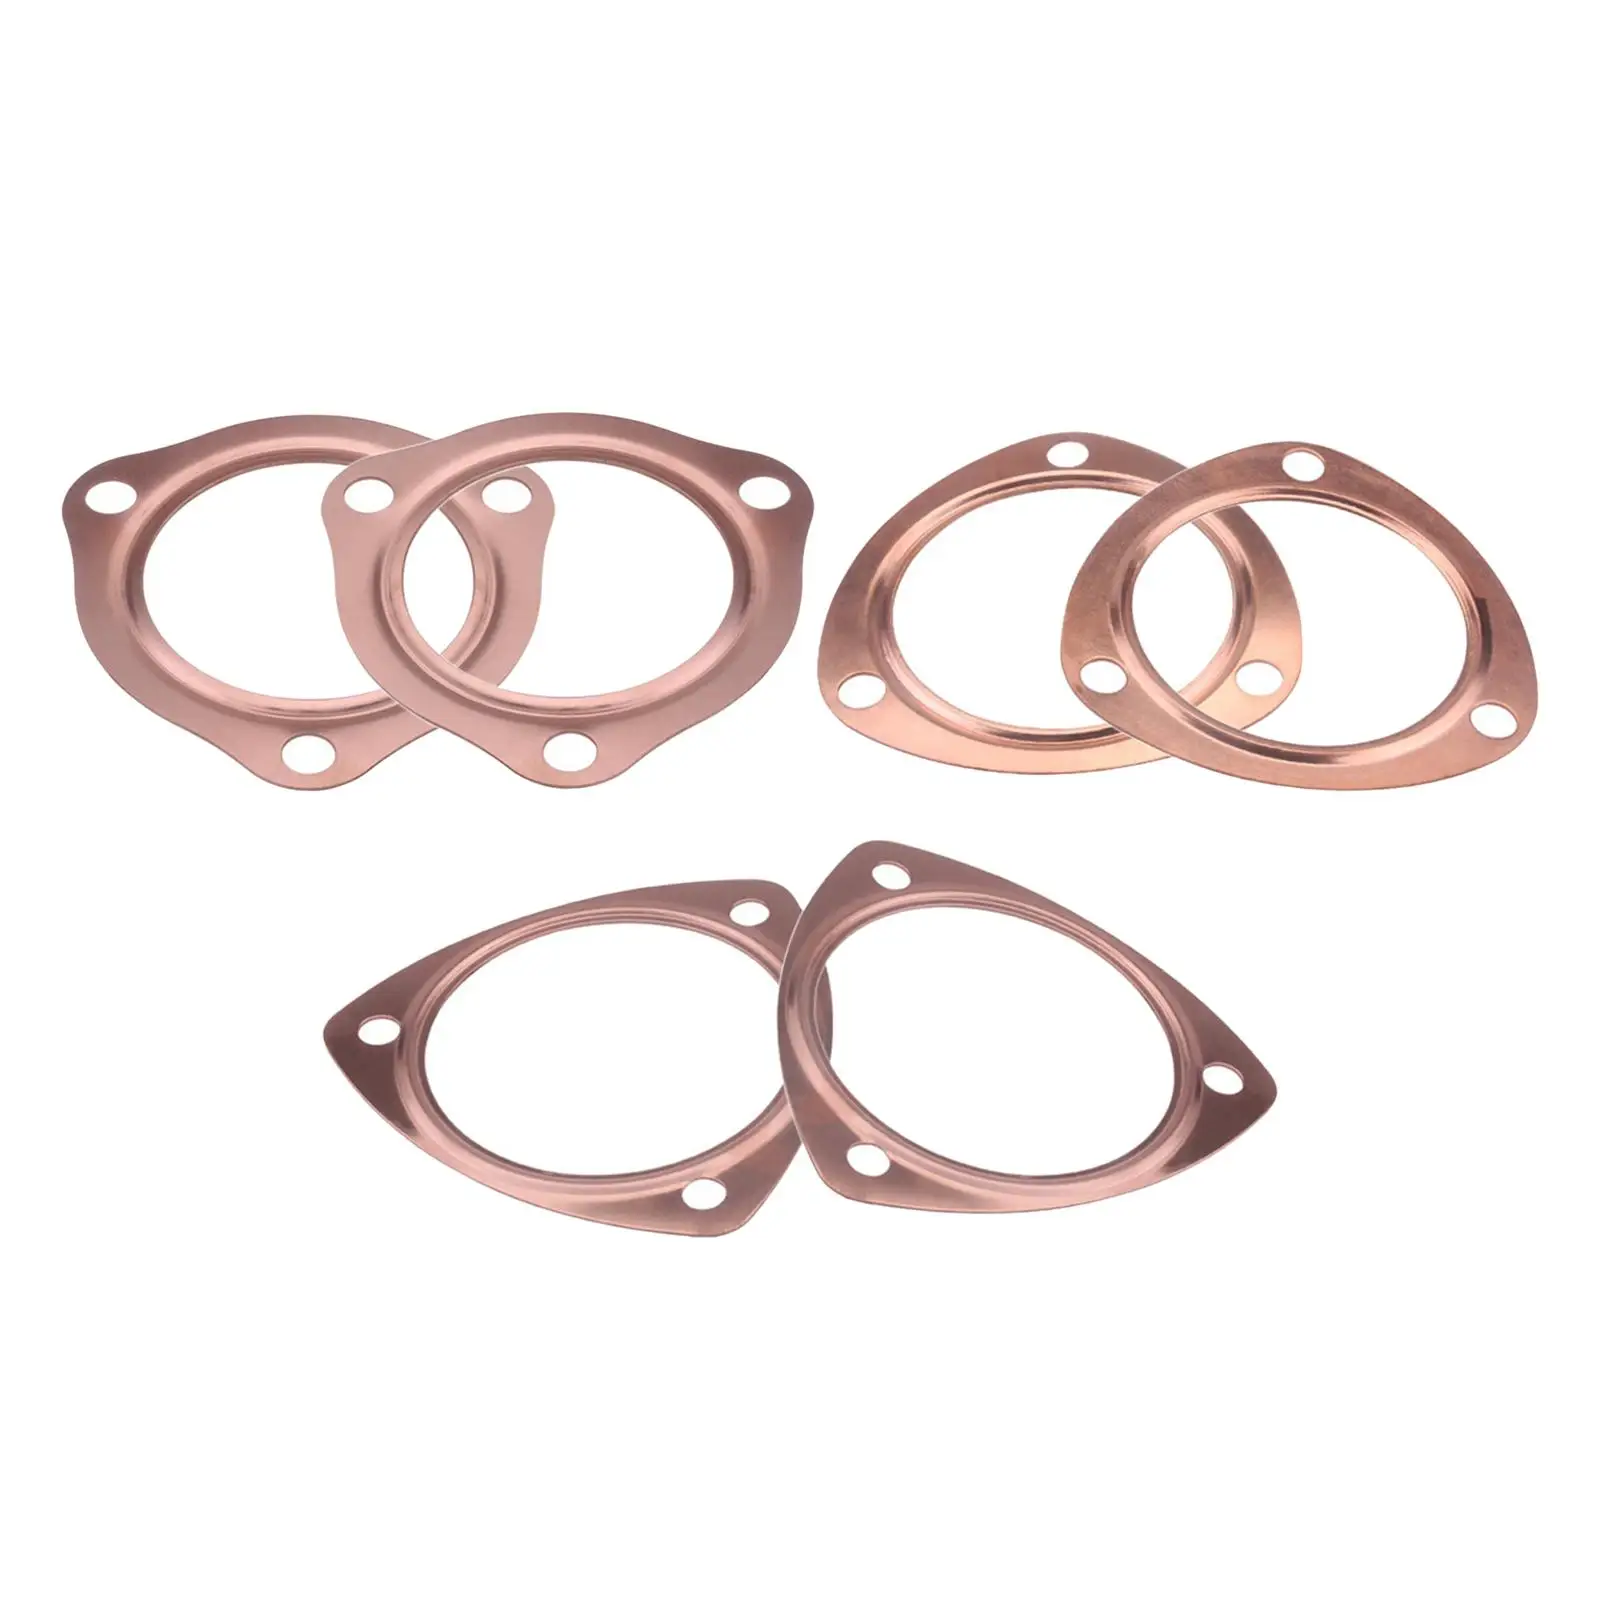 Header Collector Gaskets Durable for Sbc Bbc 302 350 454 Replaces Spare Parts